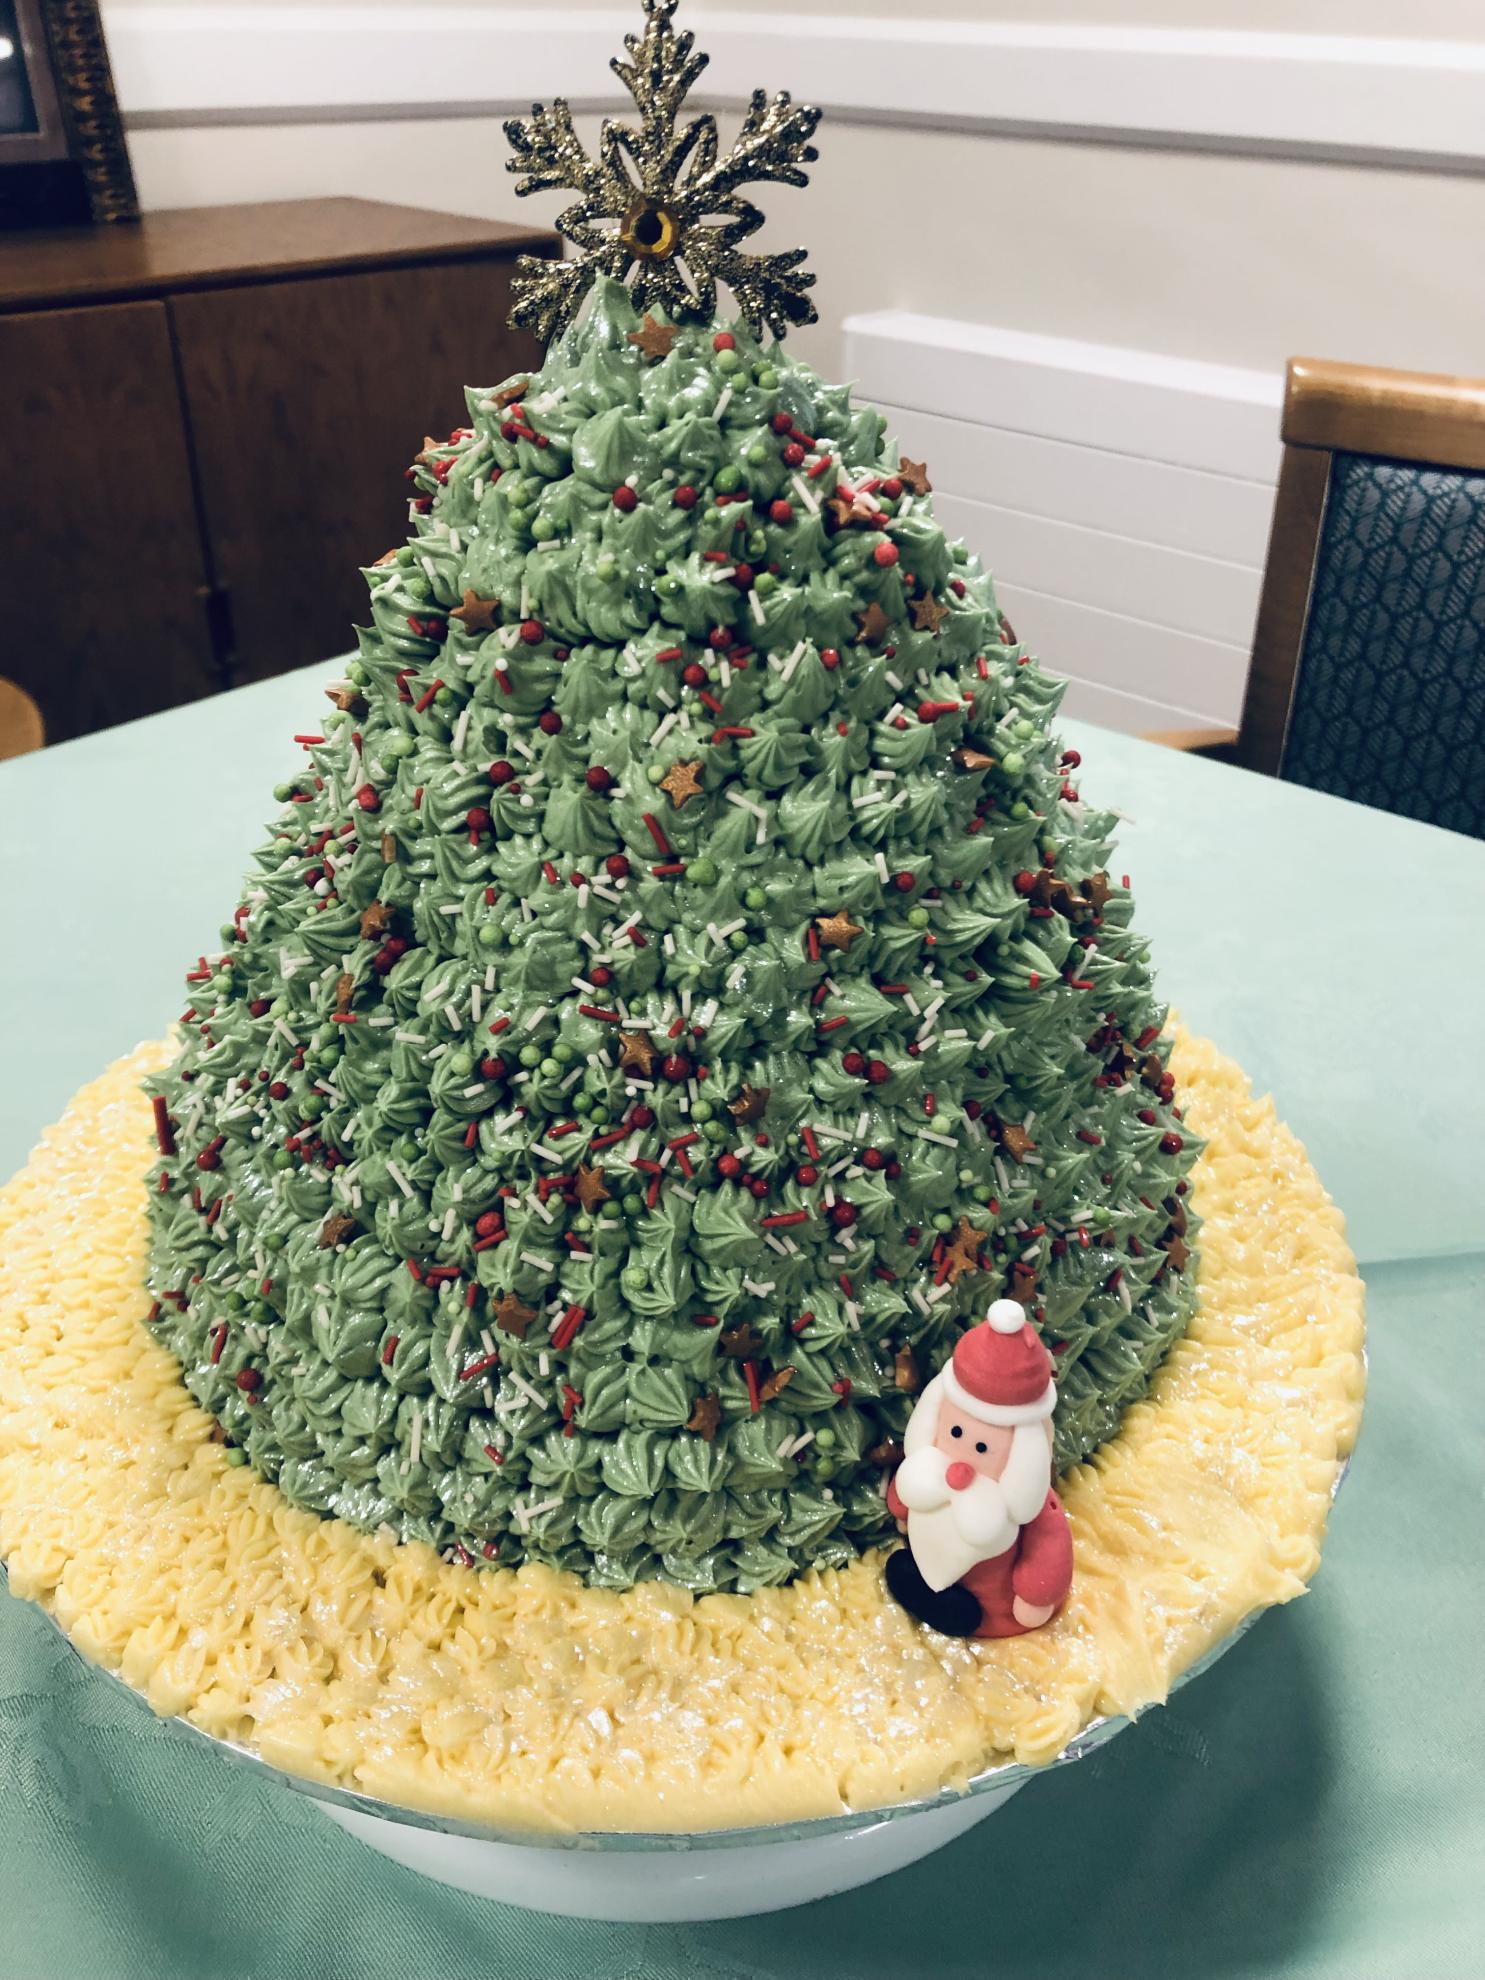 Christmas cake by Paisley Lodge in Leeds 